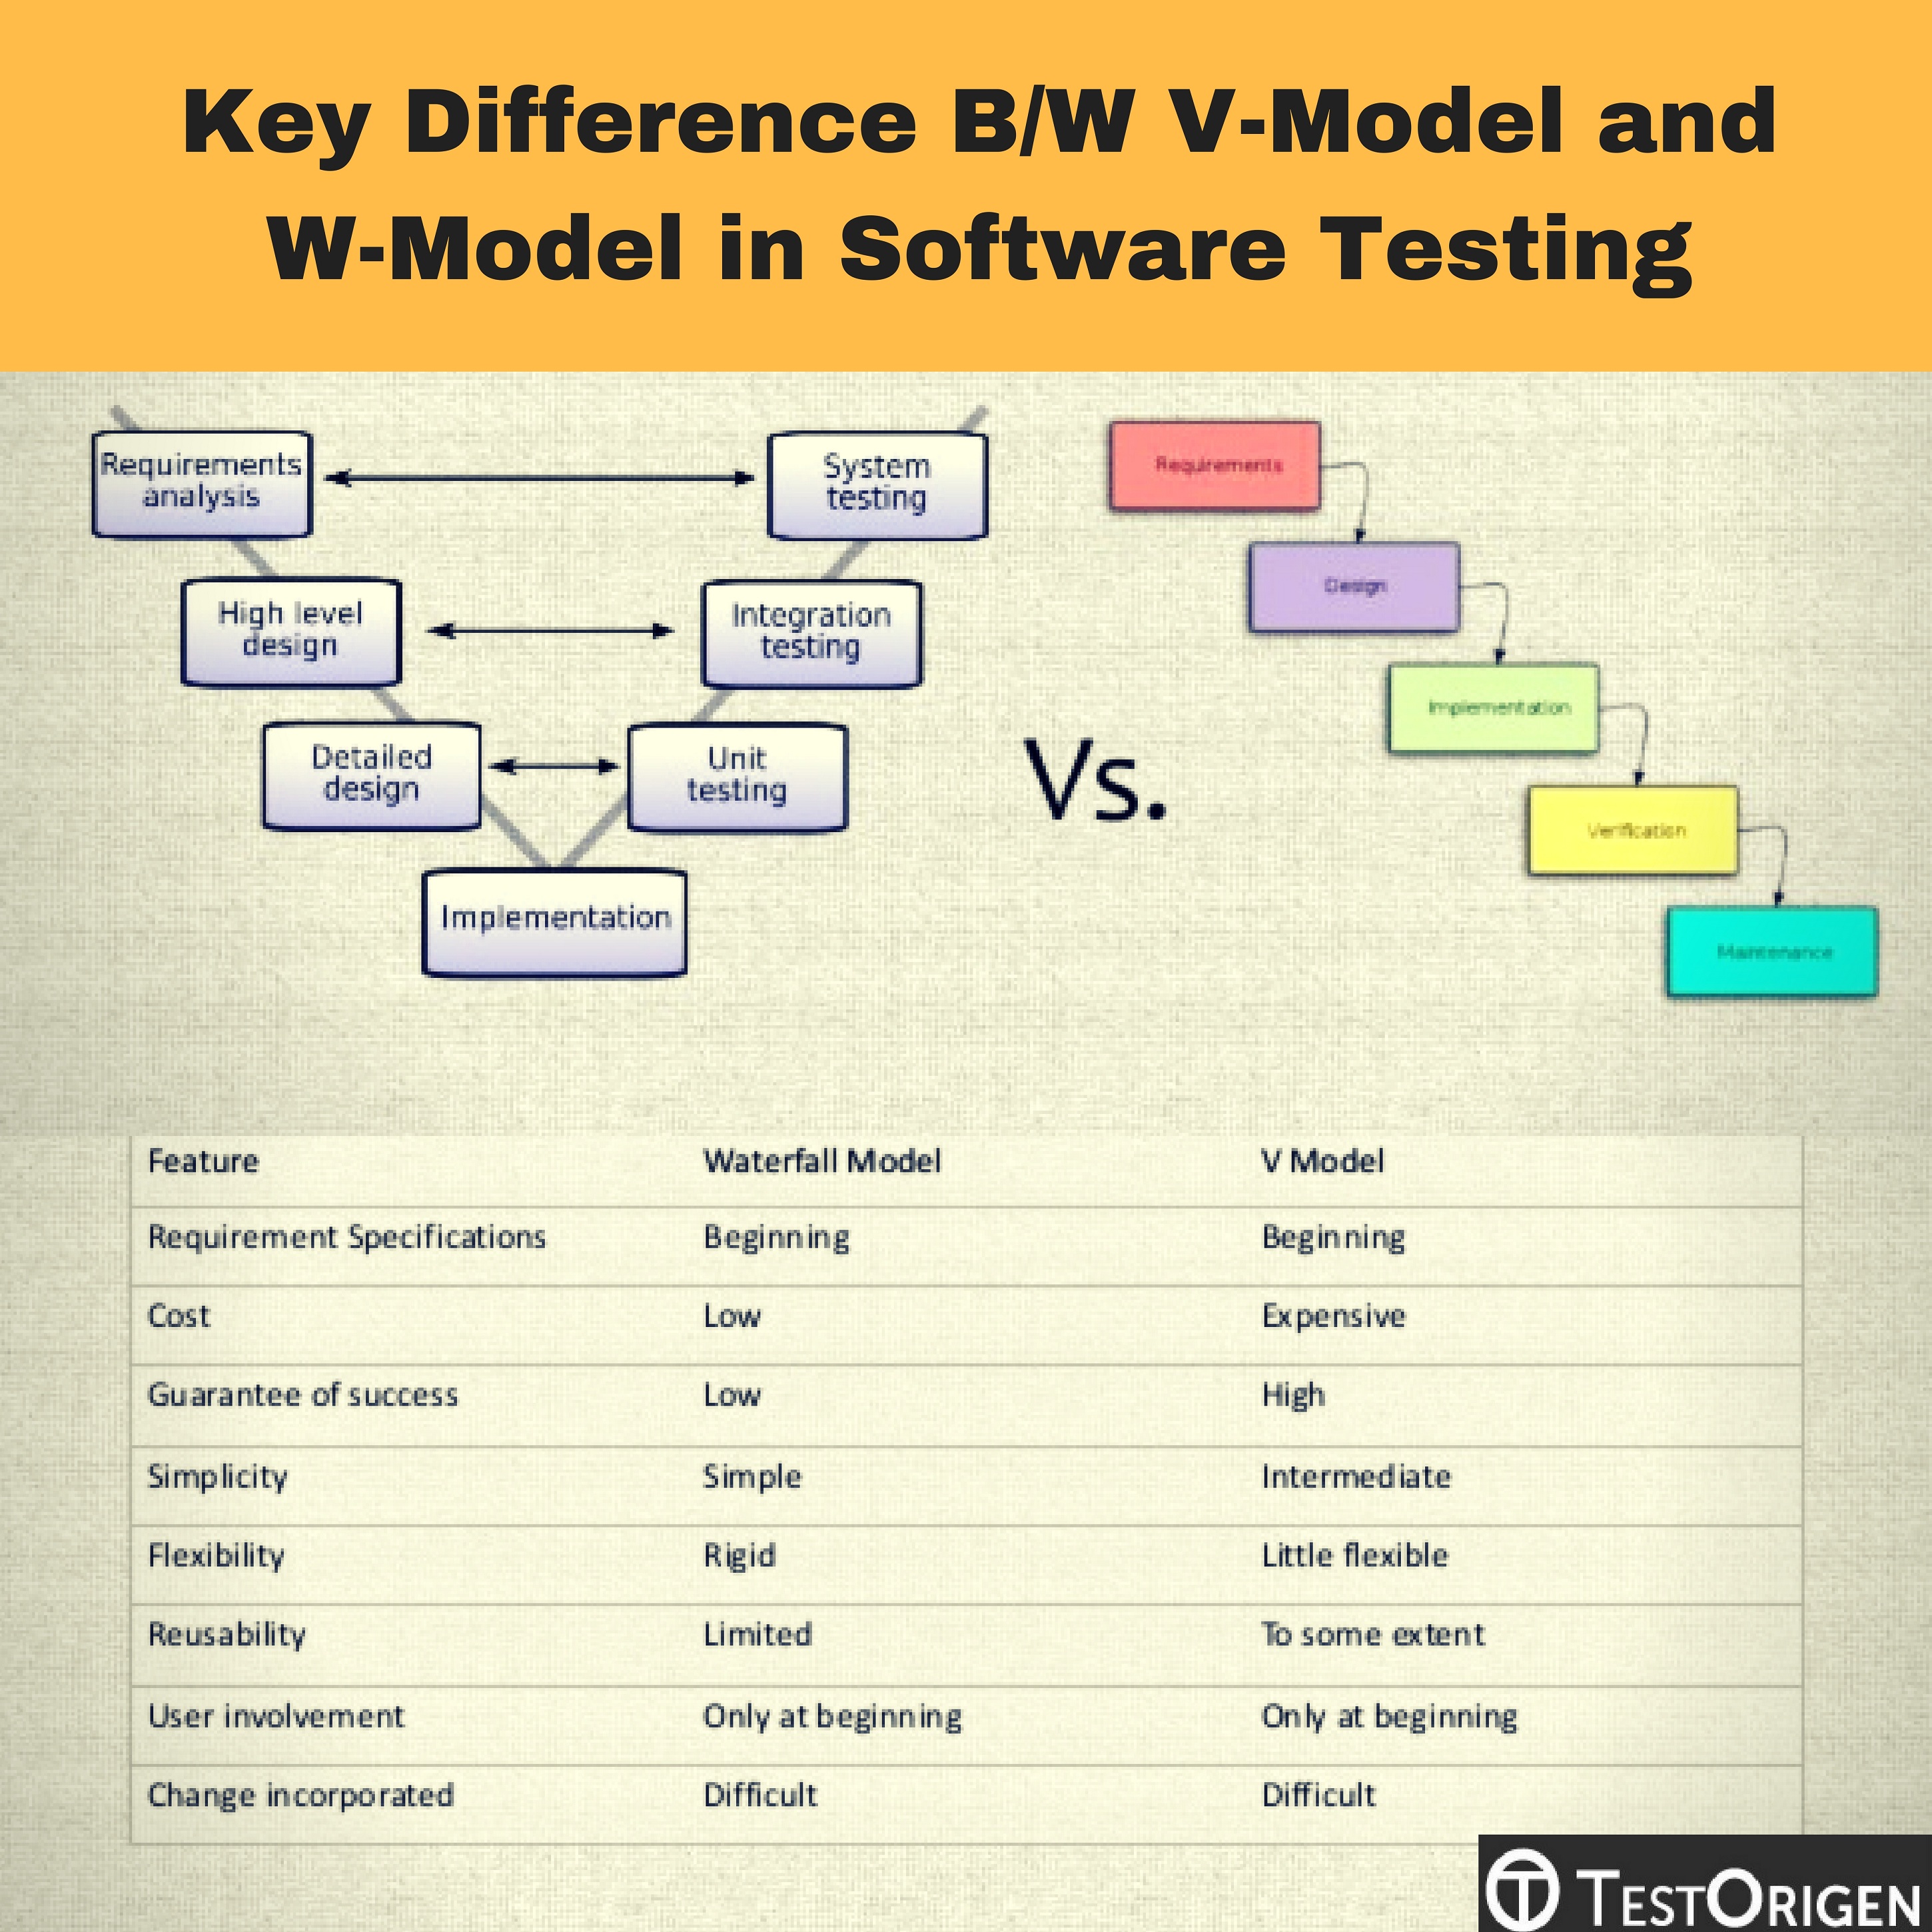 Key Difference B/W V-Model and W-Model in Software Testing